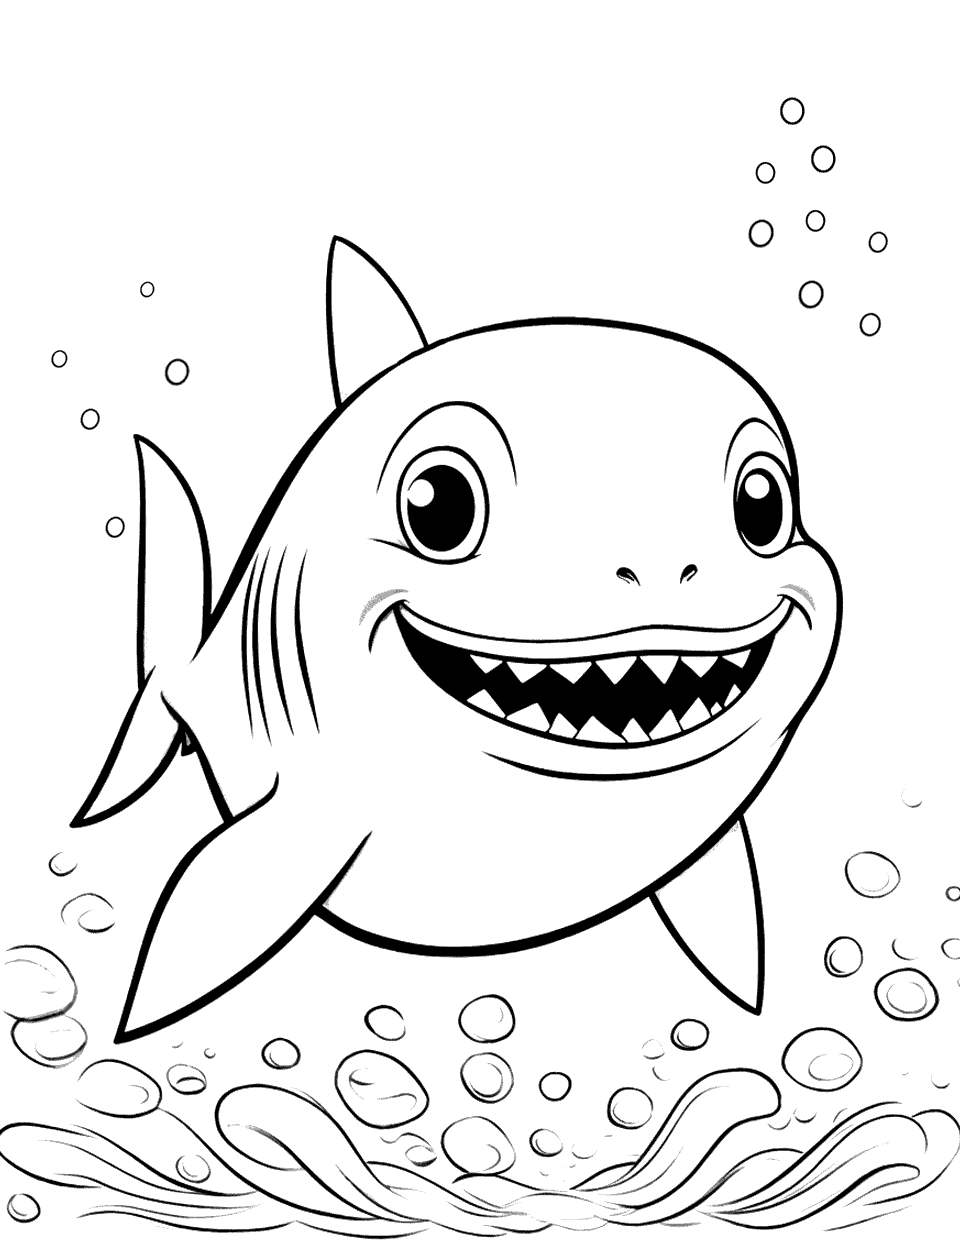 Realistic Baby Shark Coloring Page - A more lifelike depiction of Baby Shark, swimming near the ocean floor.